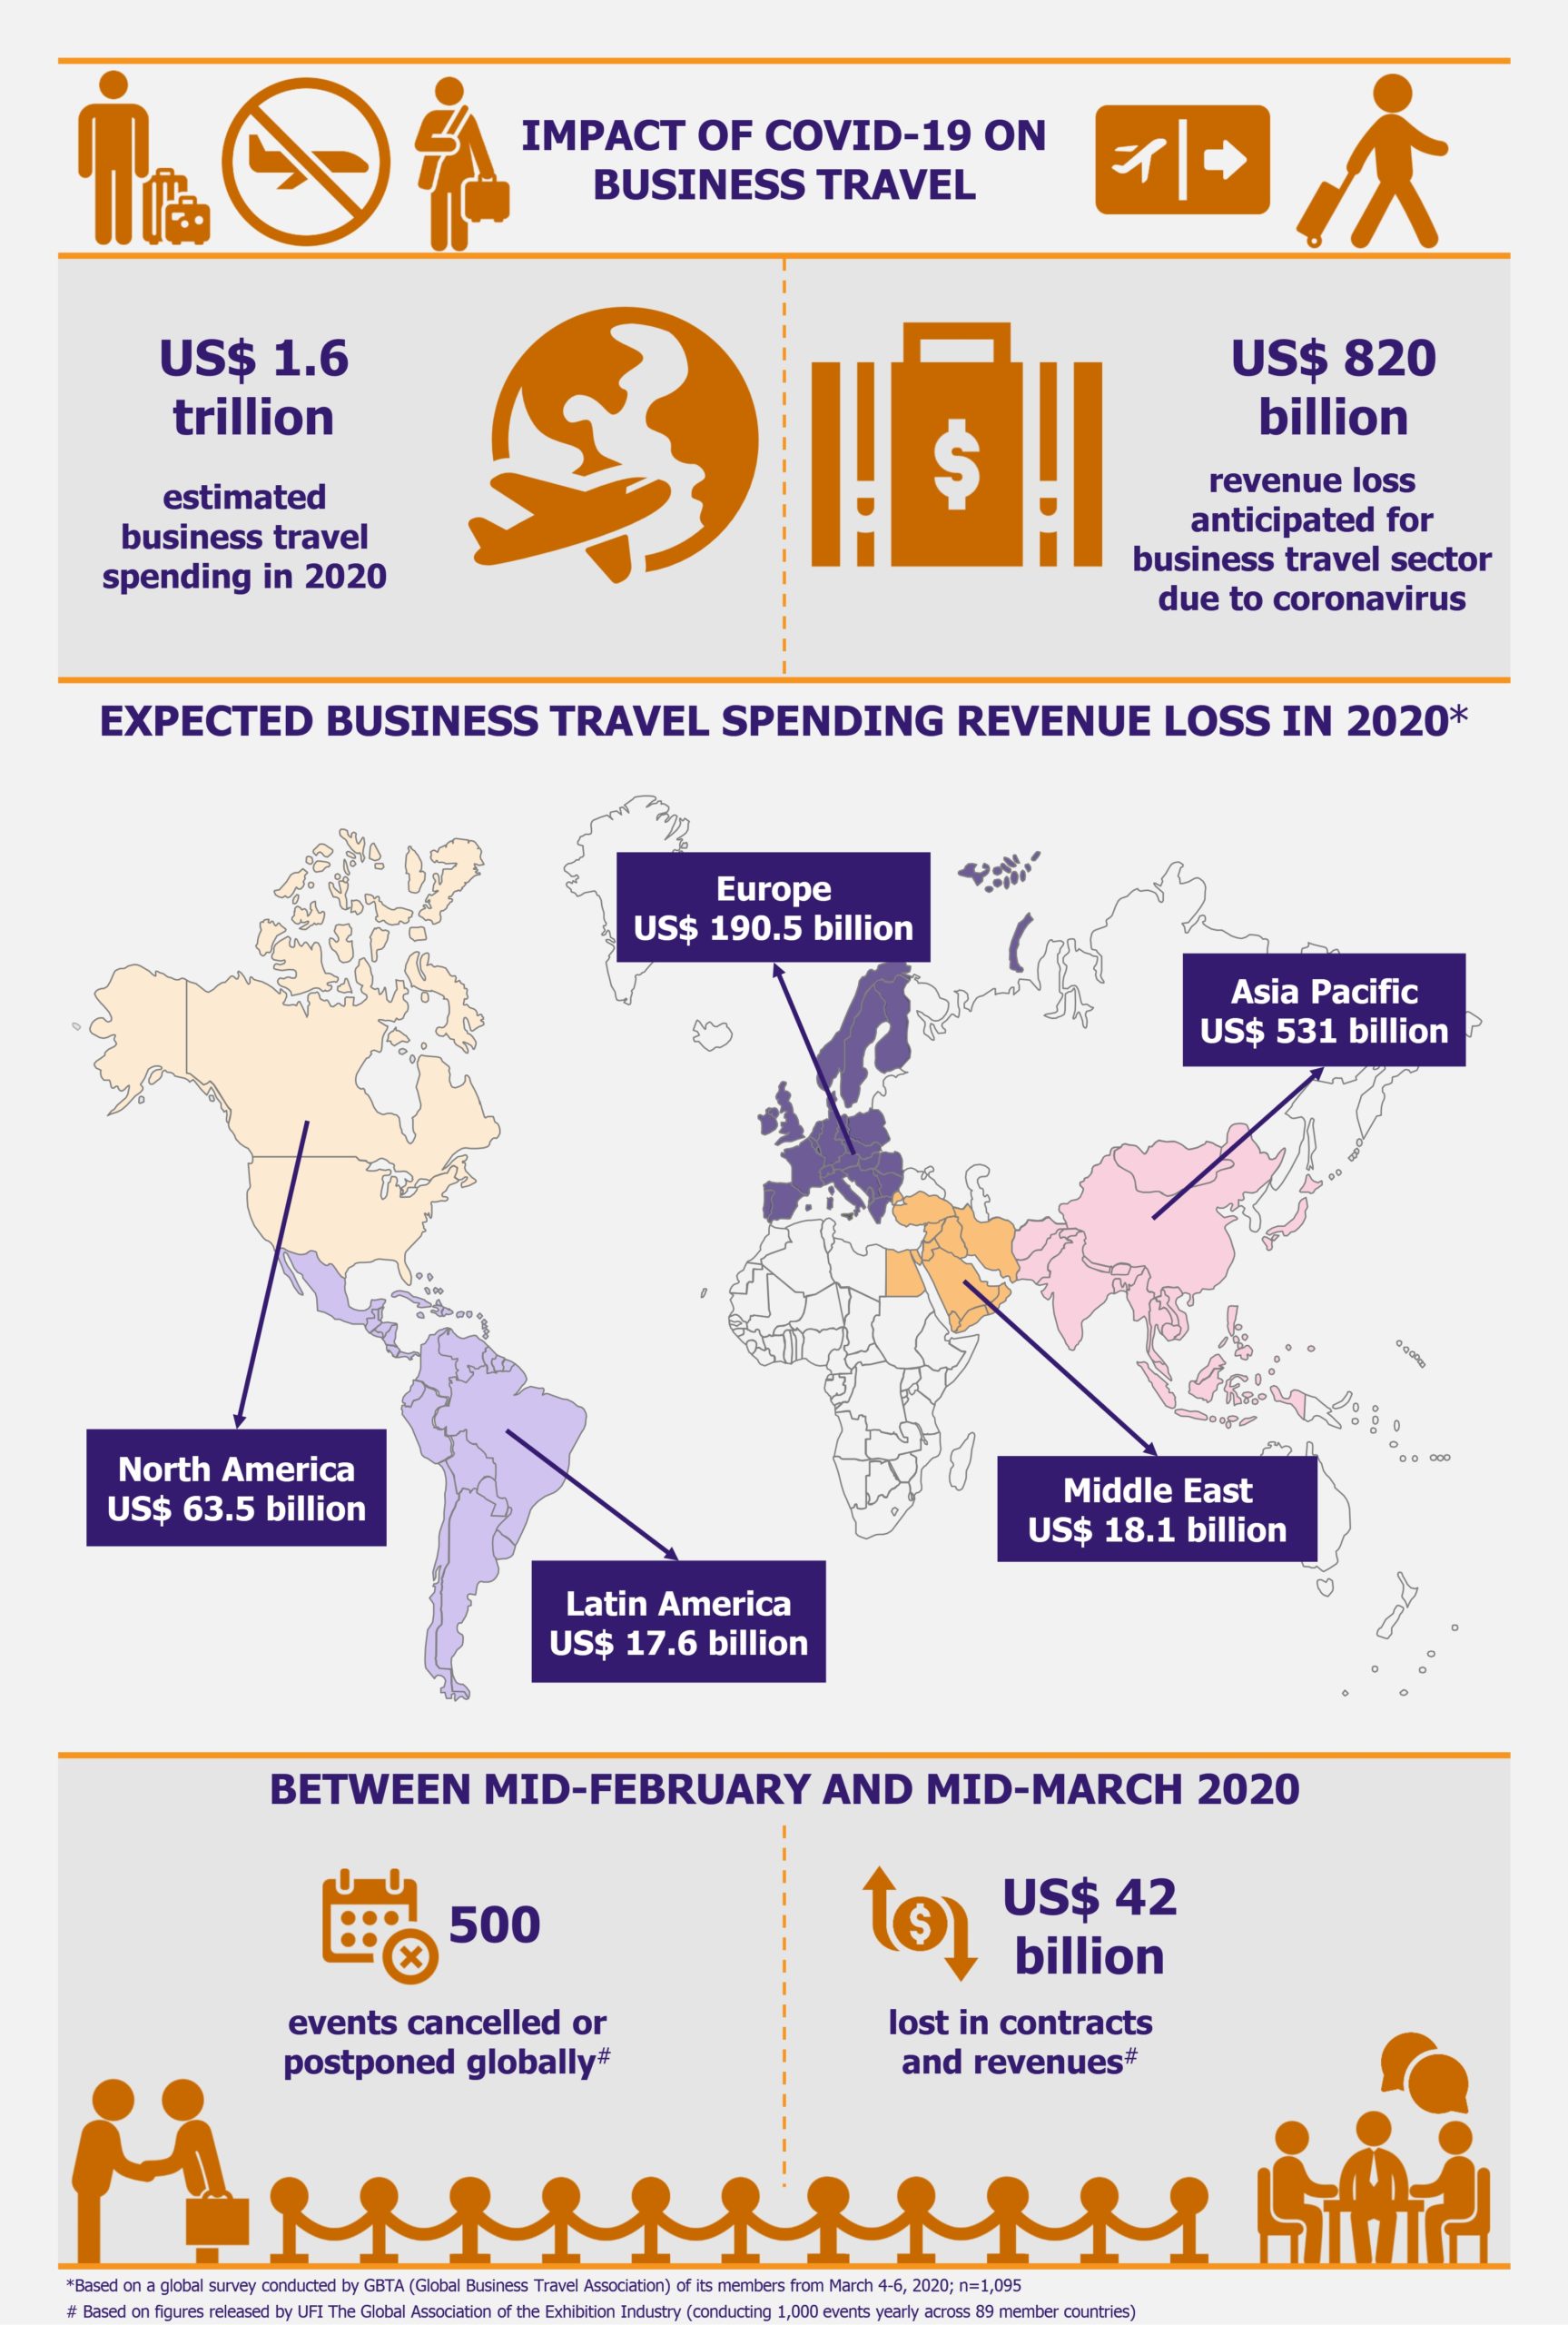 Business Travel: On the Mend but Long Recovery Ahead by EOS Intelligence